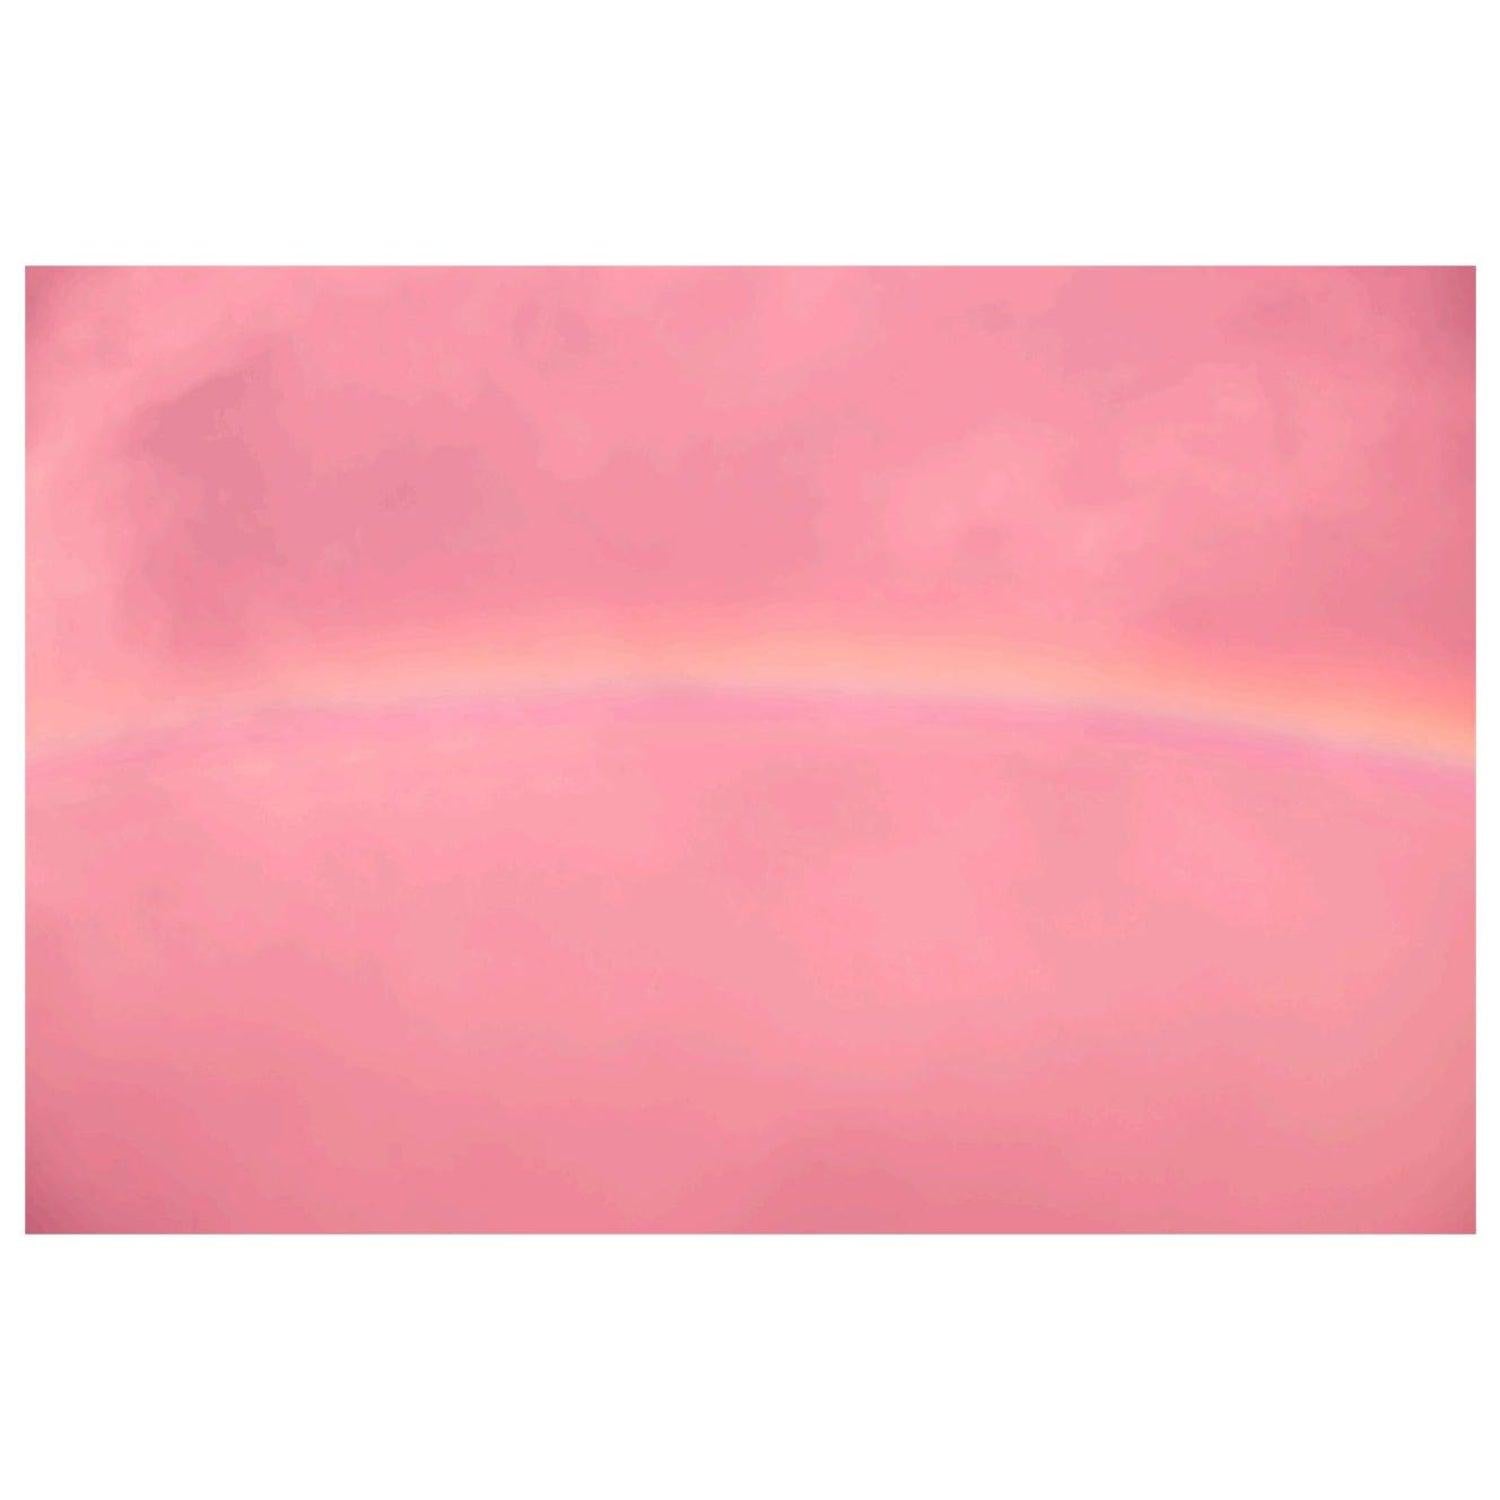 Printed on archival photo-rag paper in a seamless. Unframed.

Photographed by Ruvan Wijesooriya. This photograph brings a dynamic visual effect with a color rich illustration of the sky and rainbow.

See our shipping policies. For quotes, please